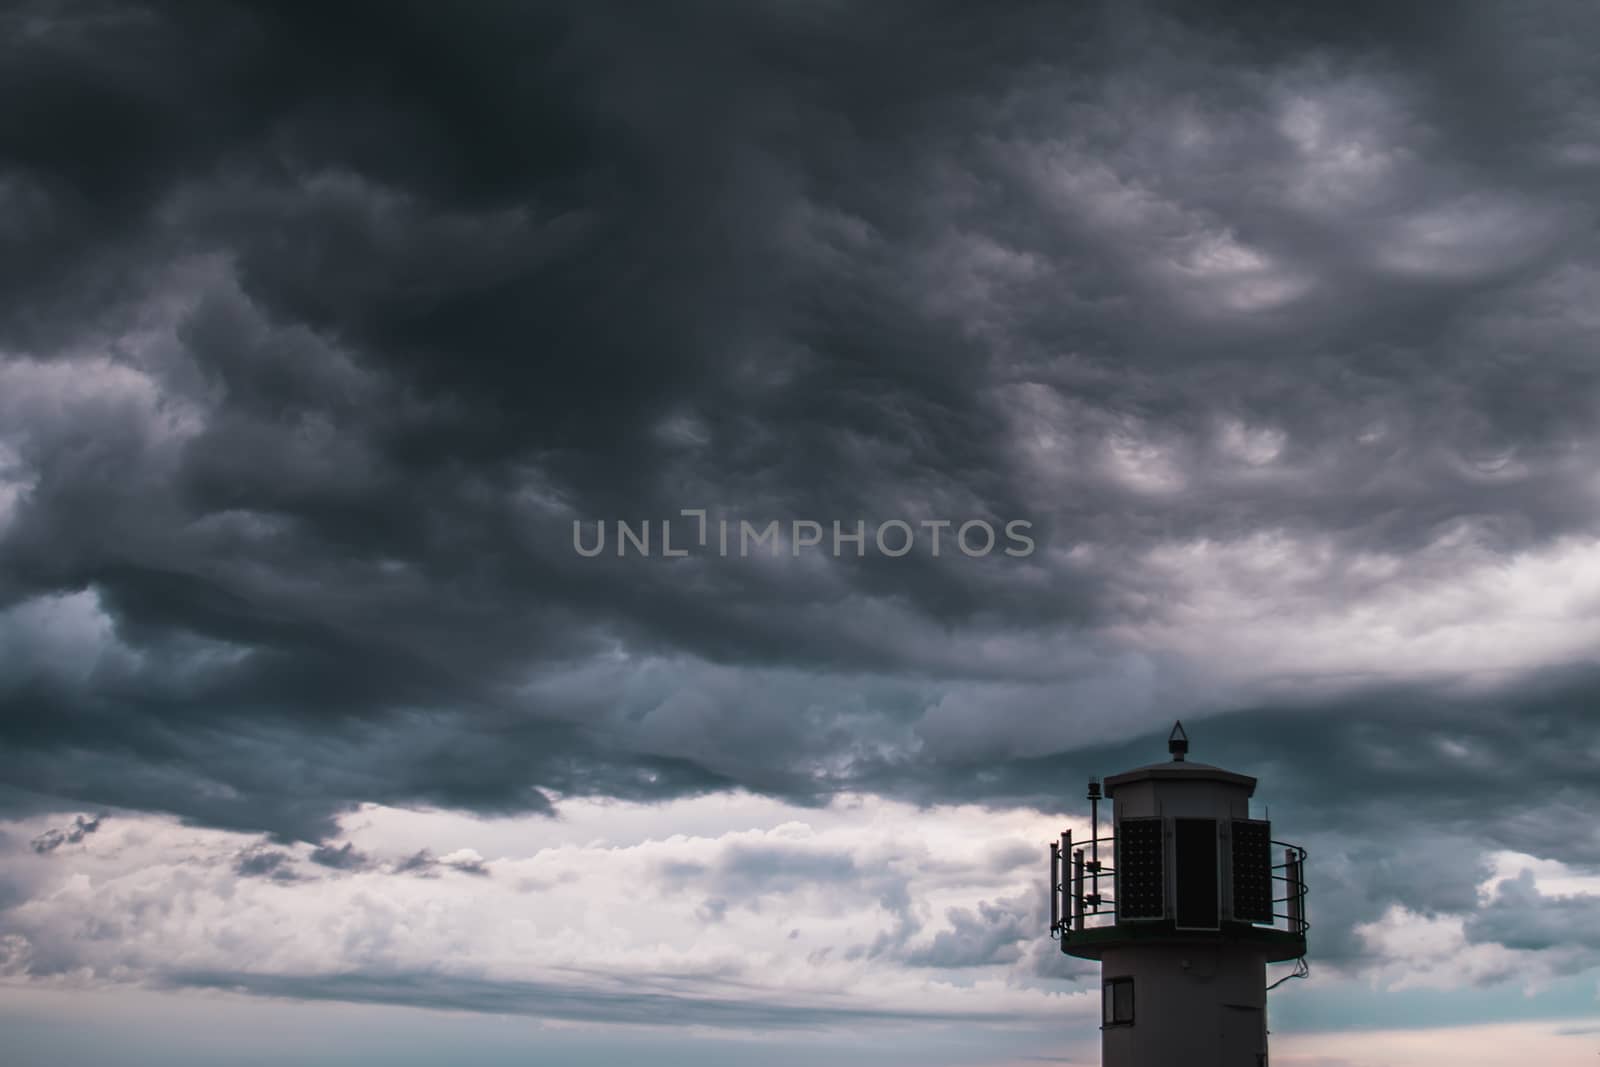 The silhouette of a lighthuse infront of a stormy cloudscape